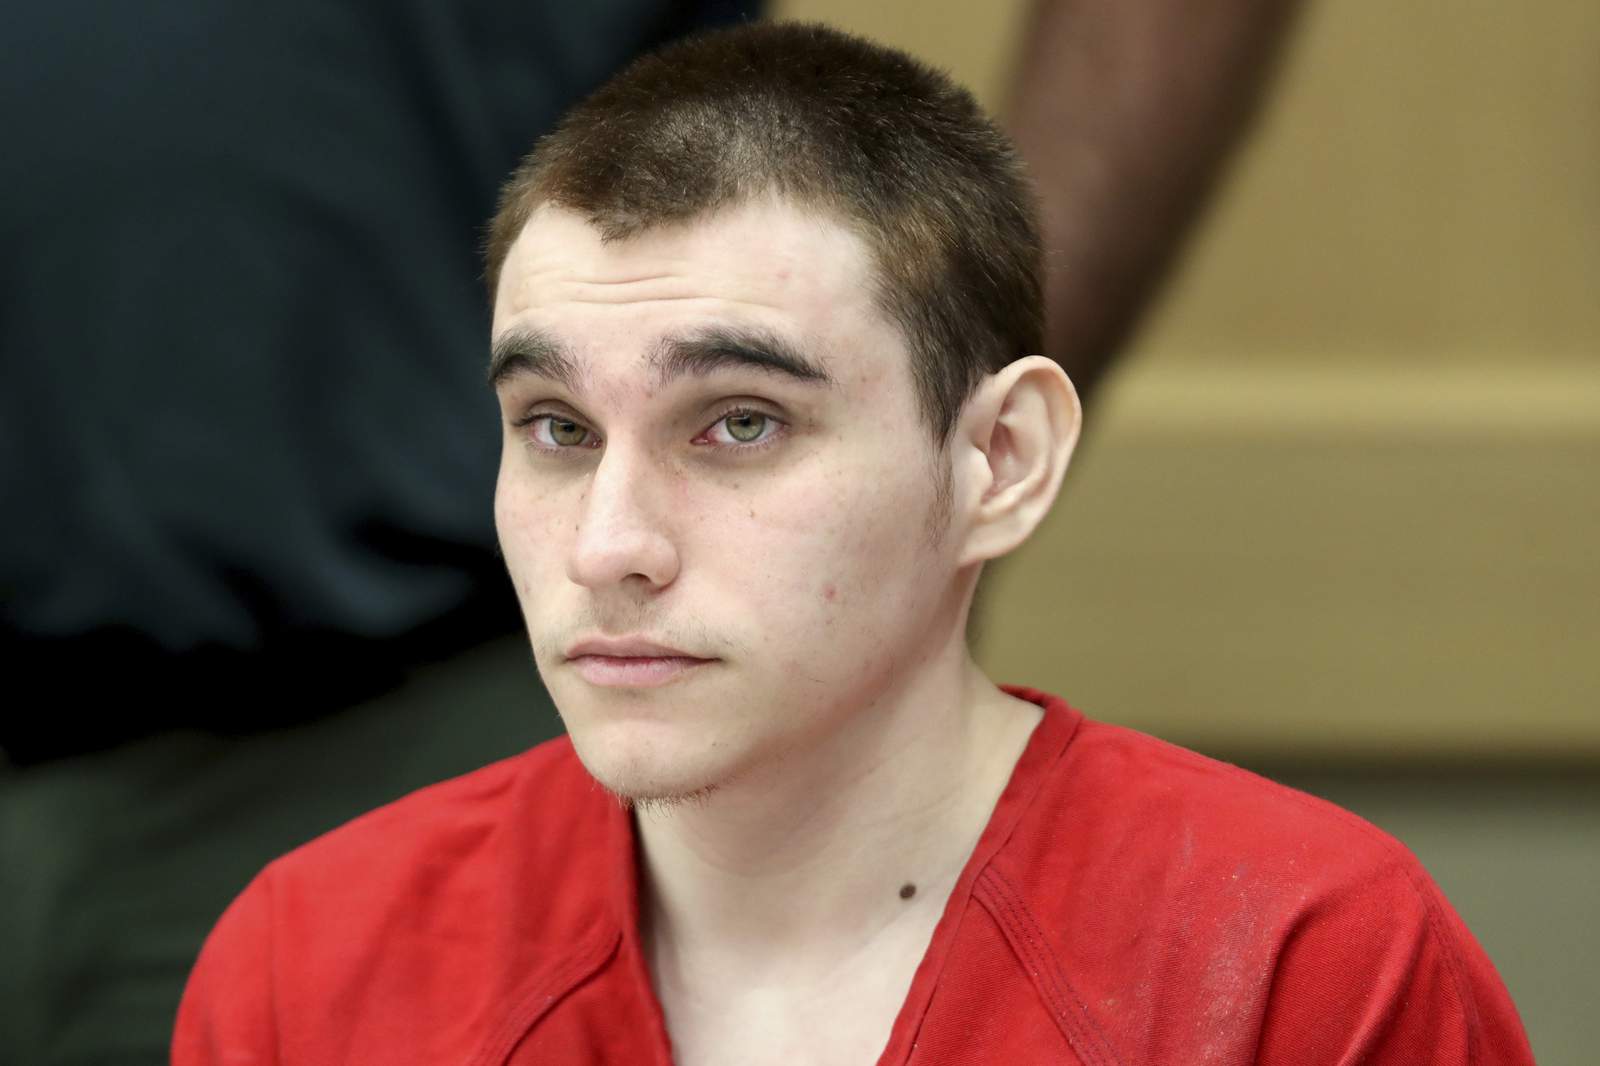 Couple apologizes for sheltering accused school shooter